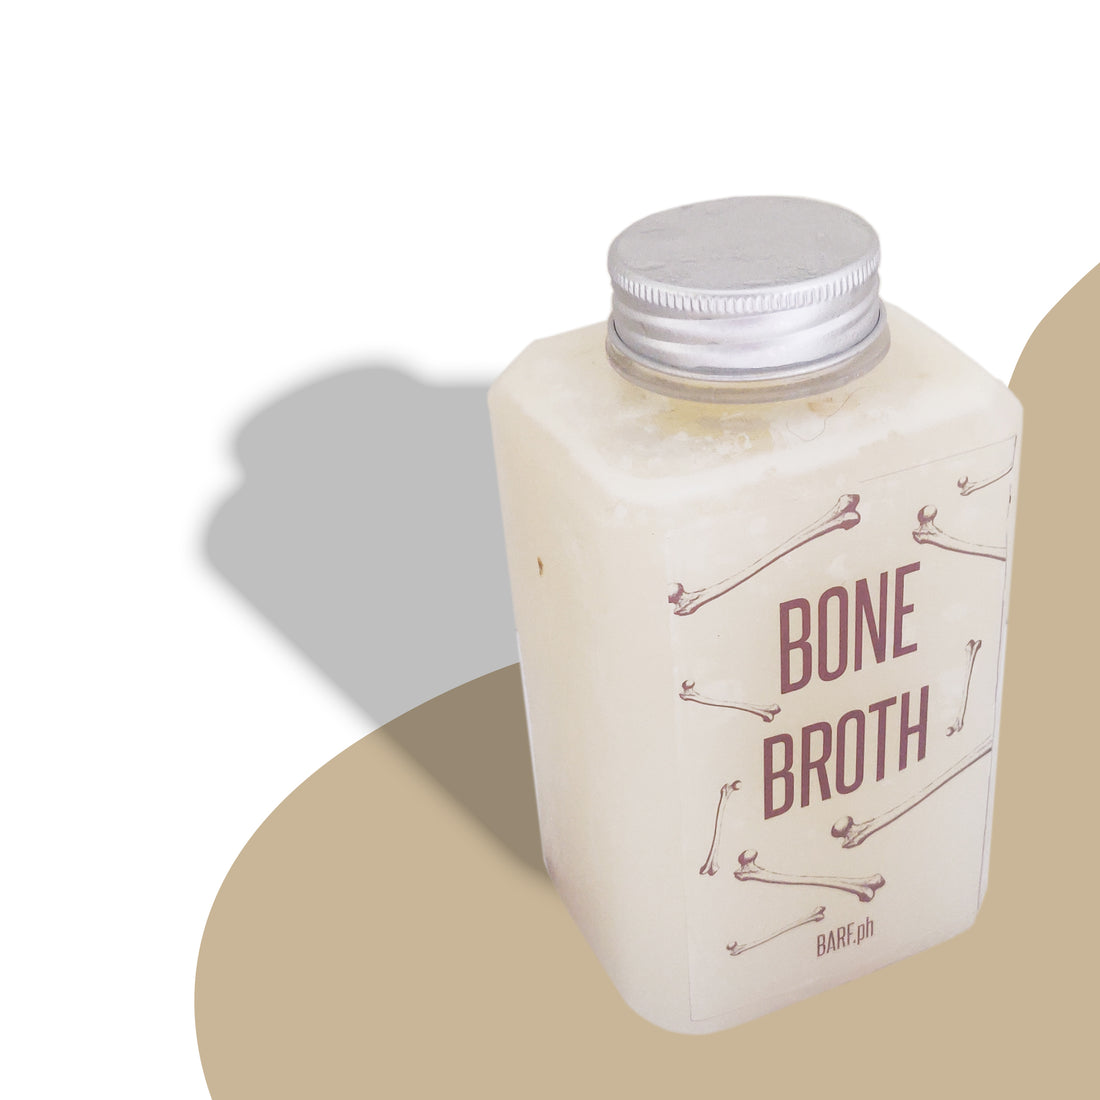 Broth new packaging